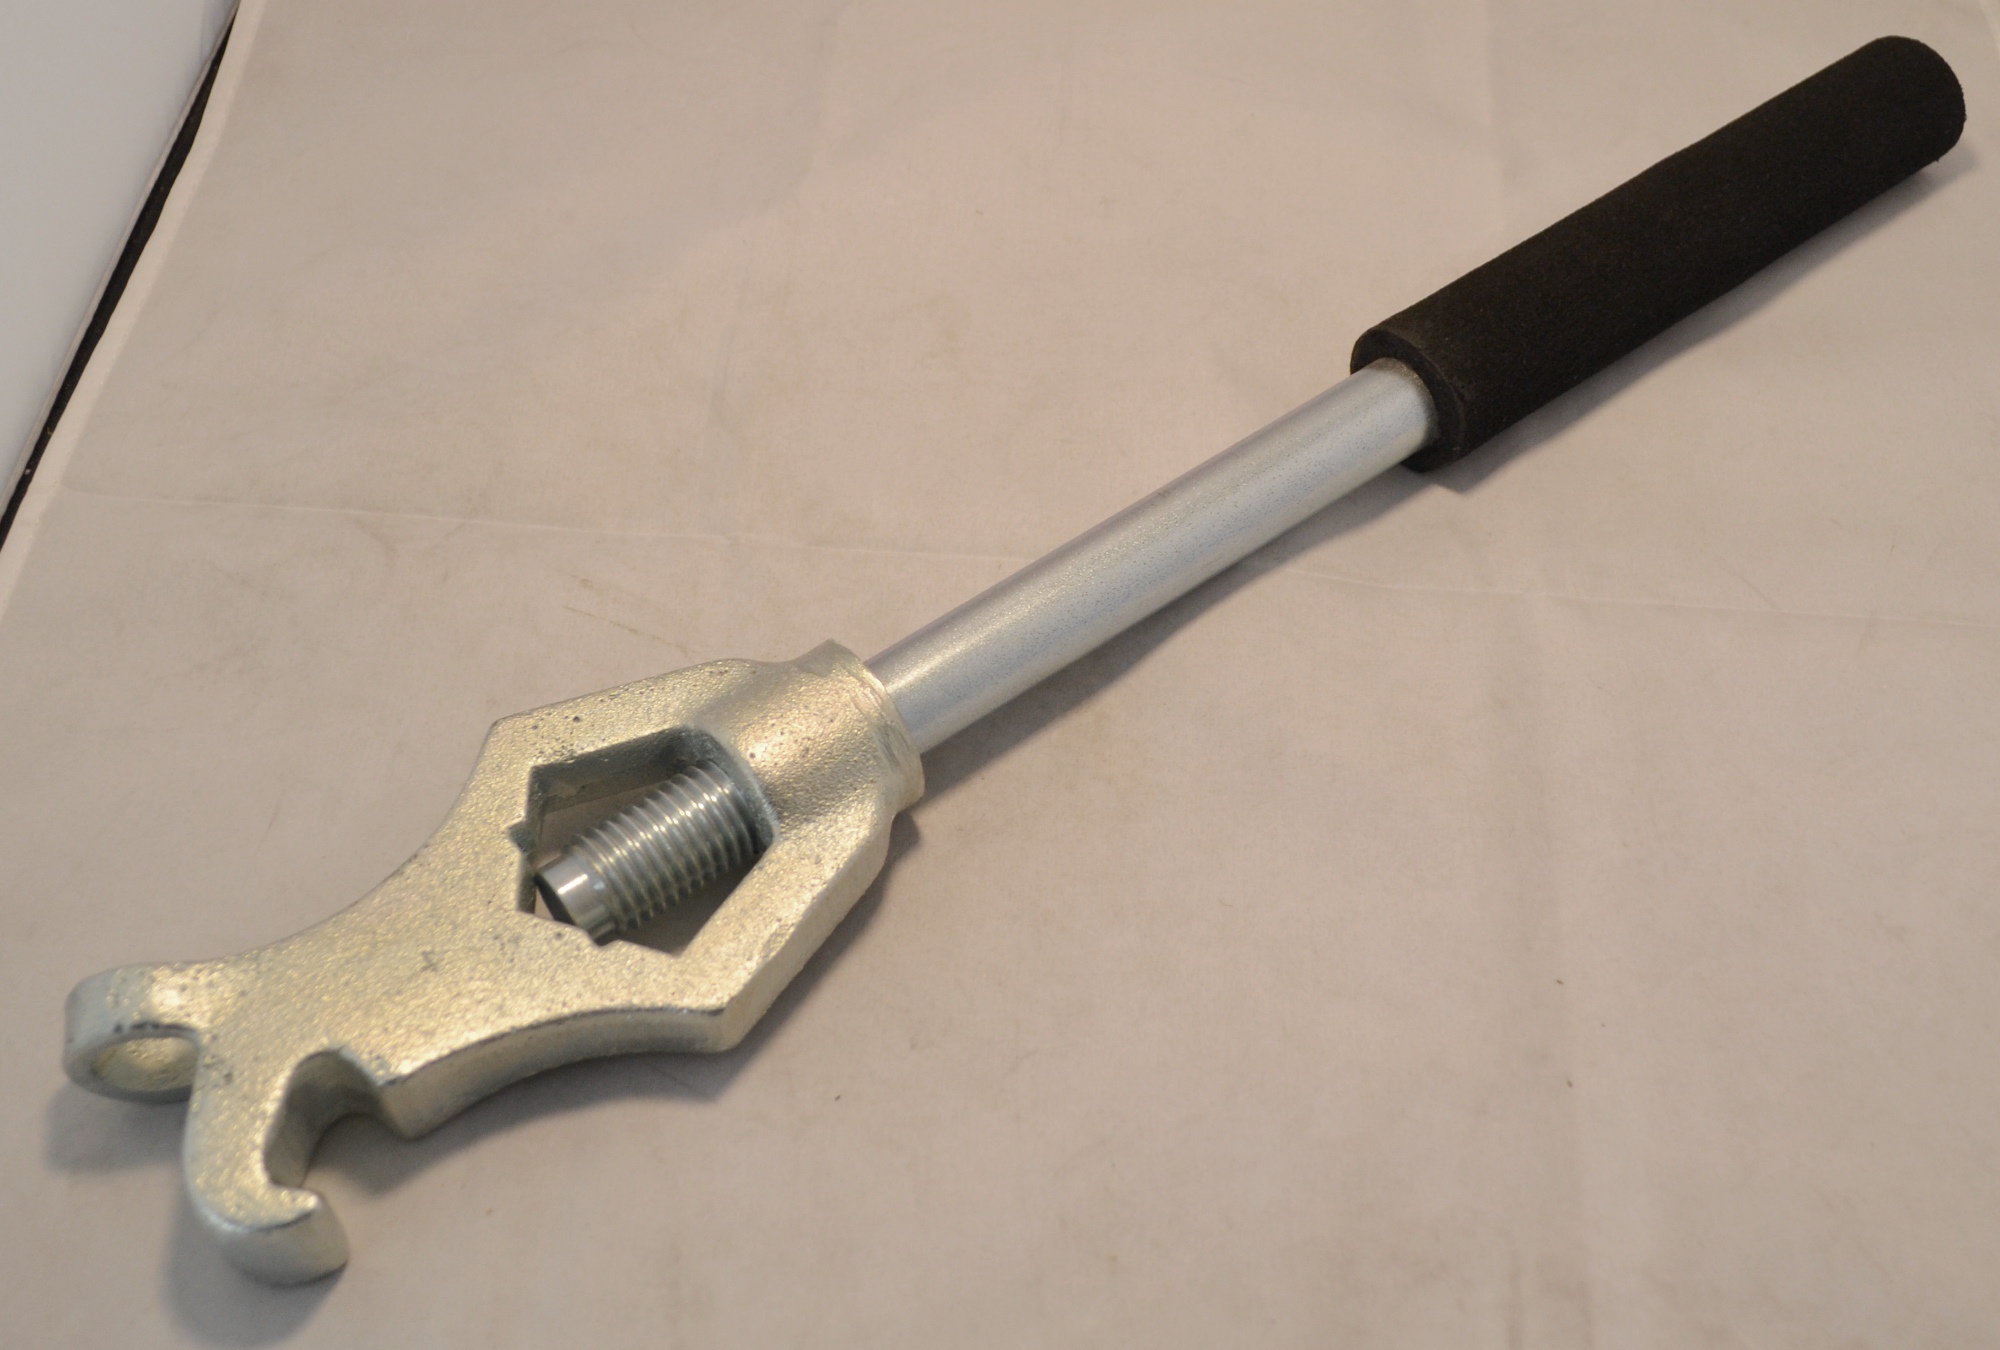 Fire Hooks Adjustable Hydrant Wrench